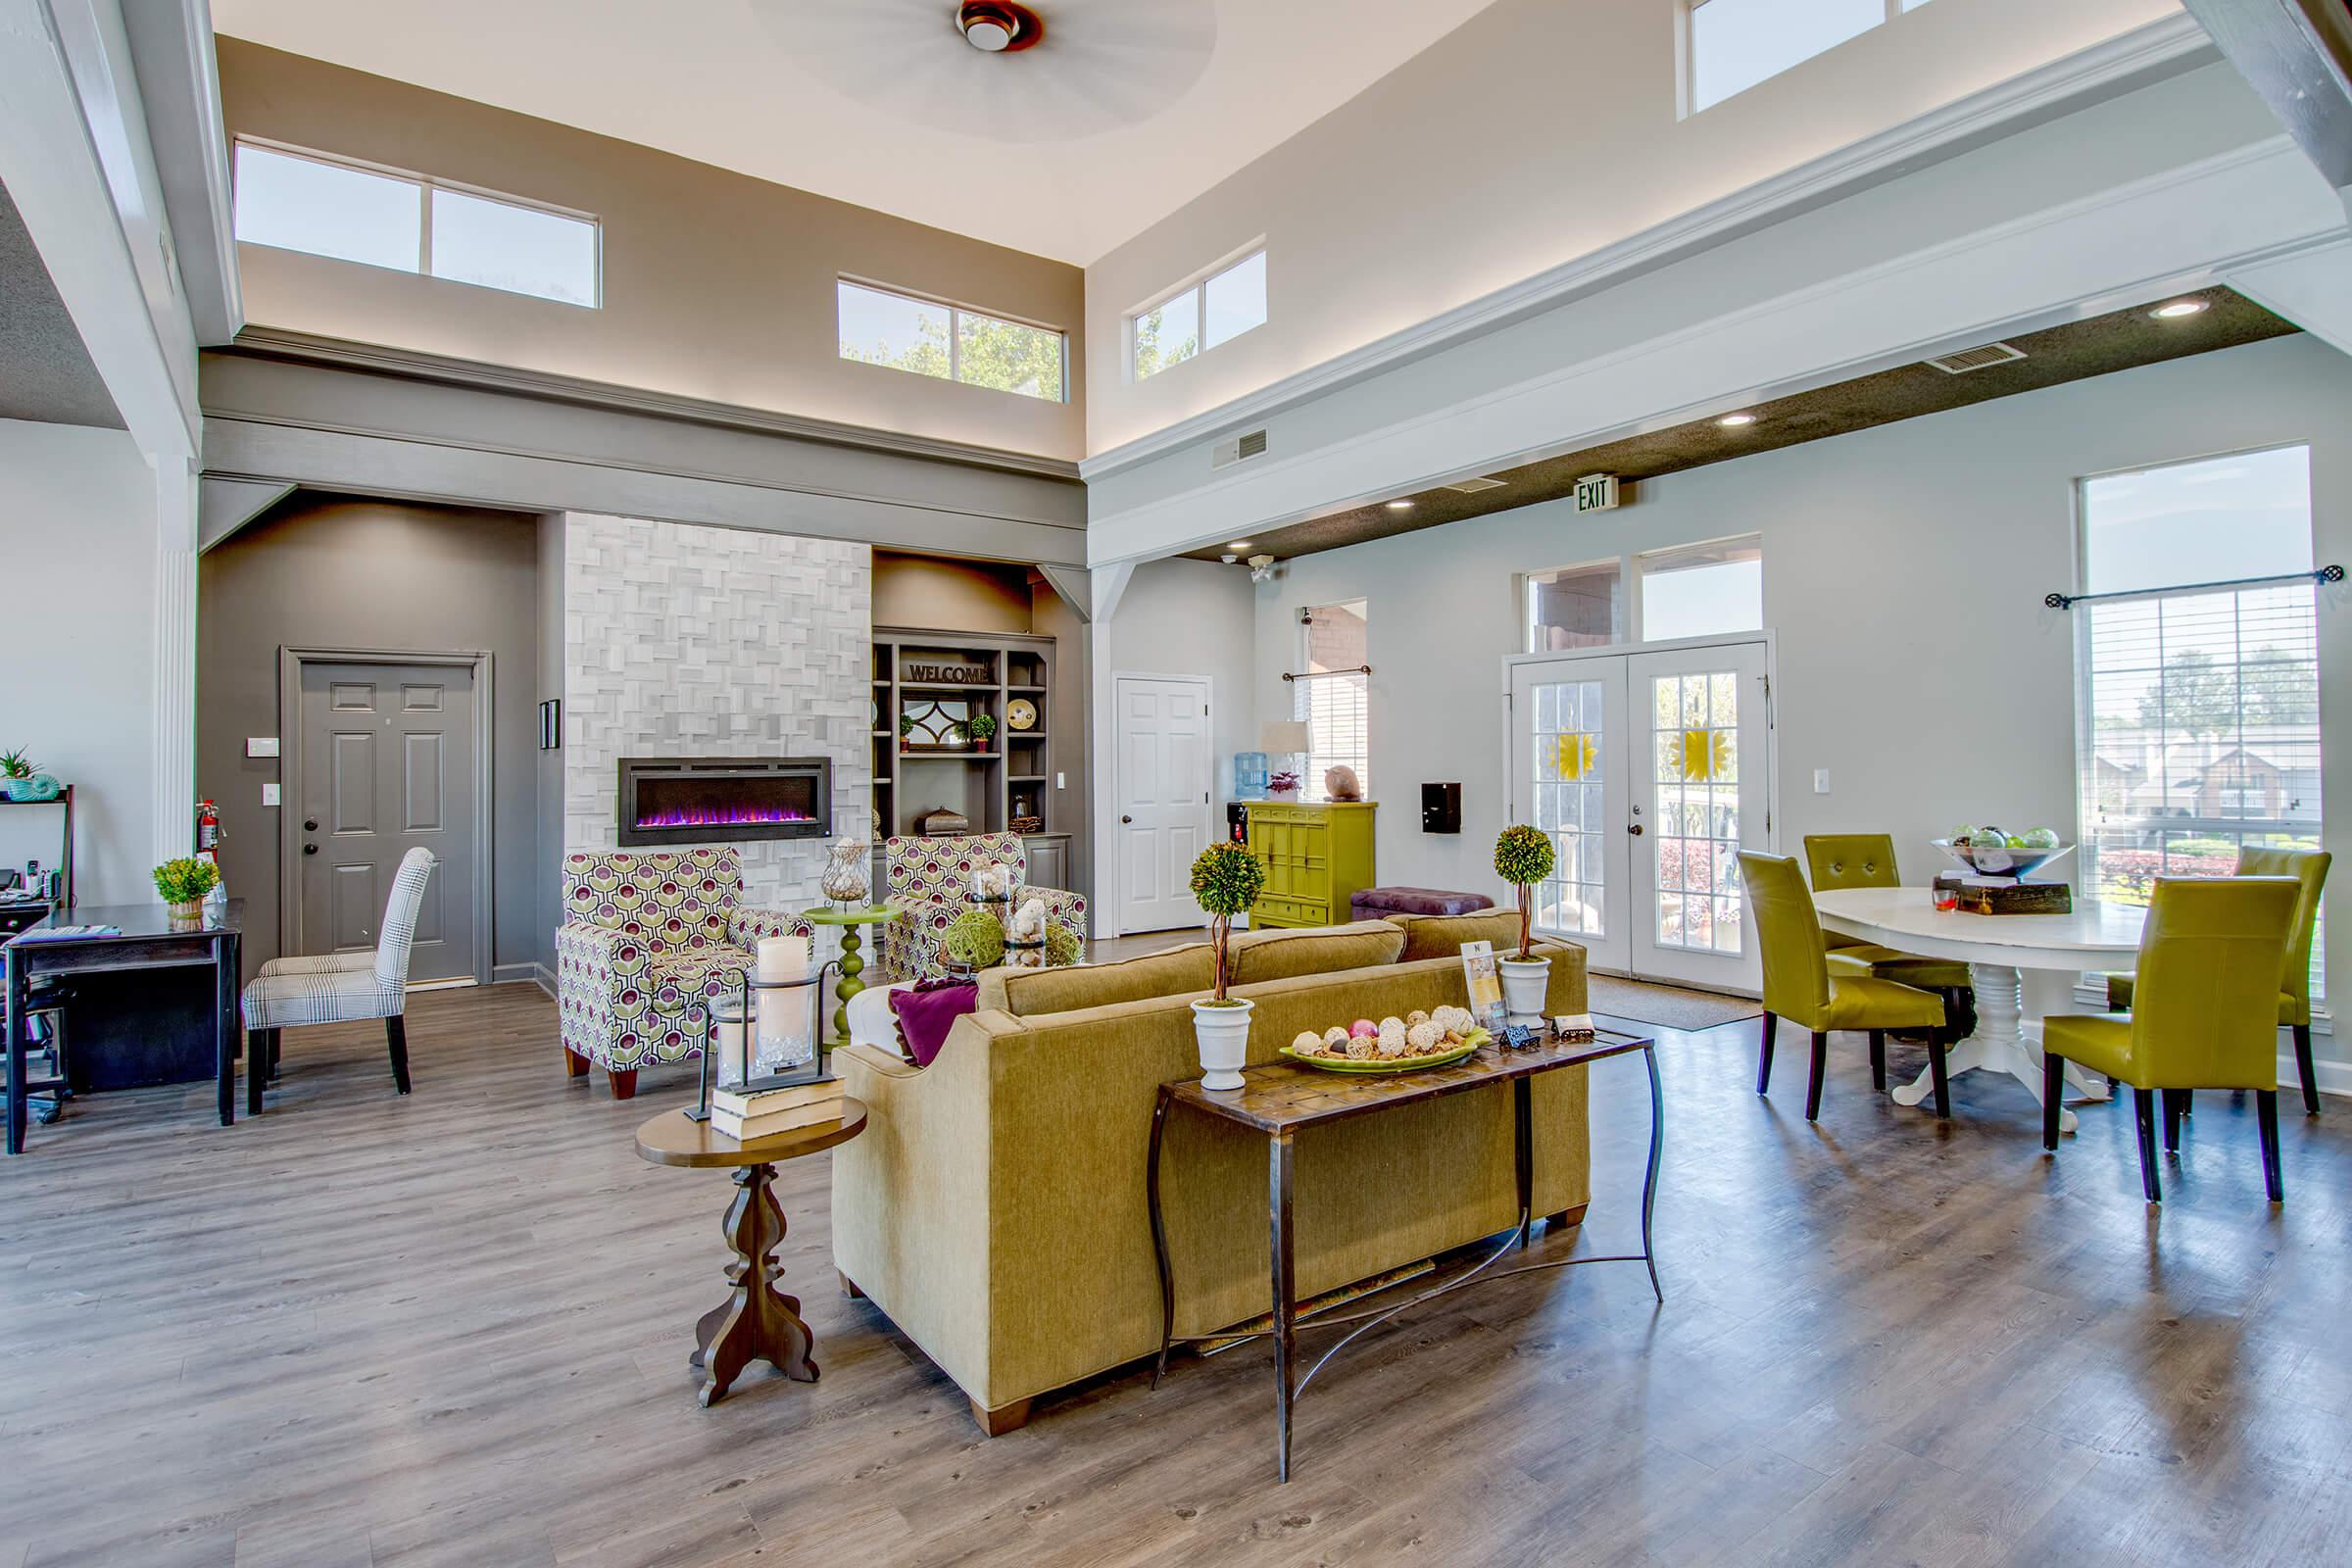 Spacious and Bright Apartments in Jackson, Tennessee